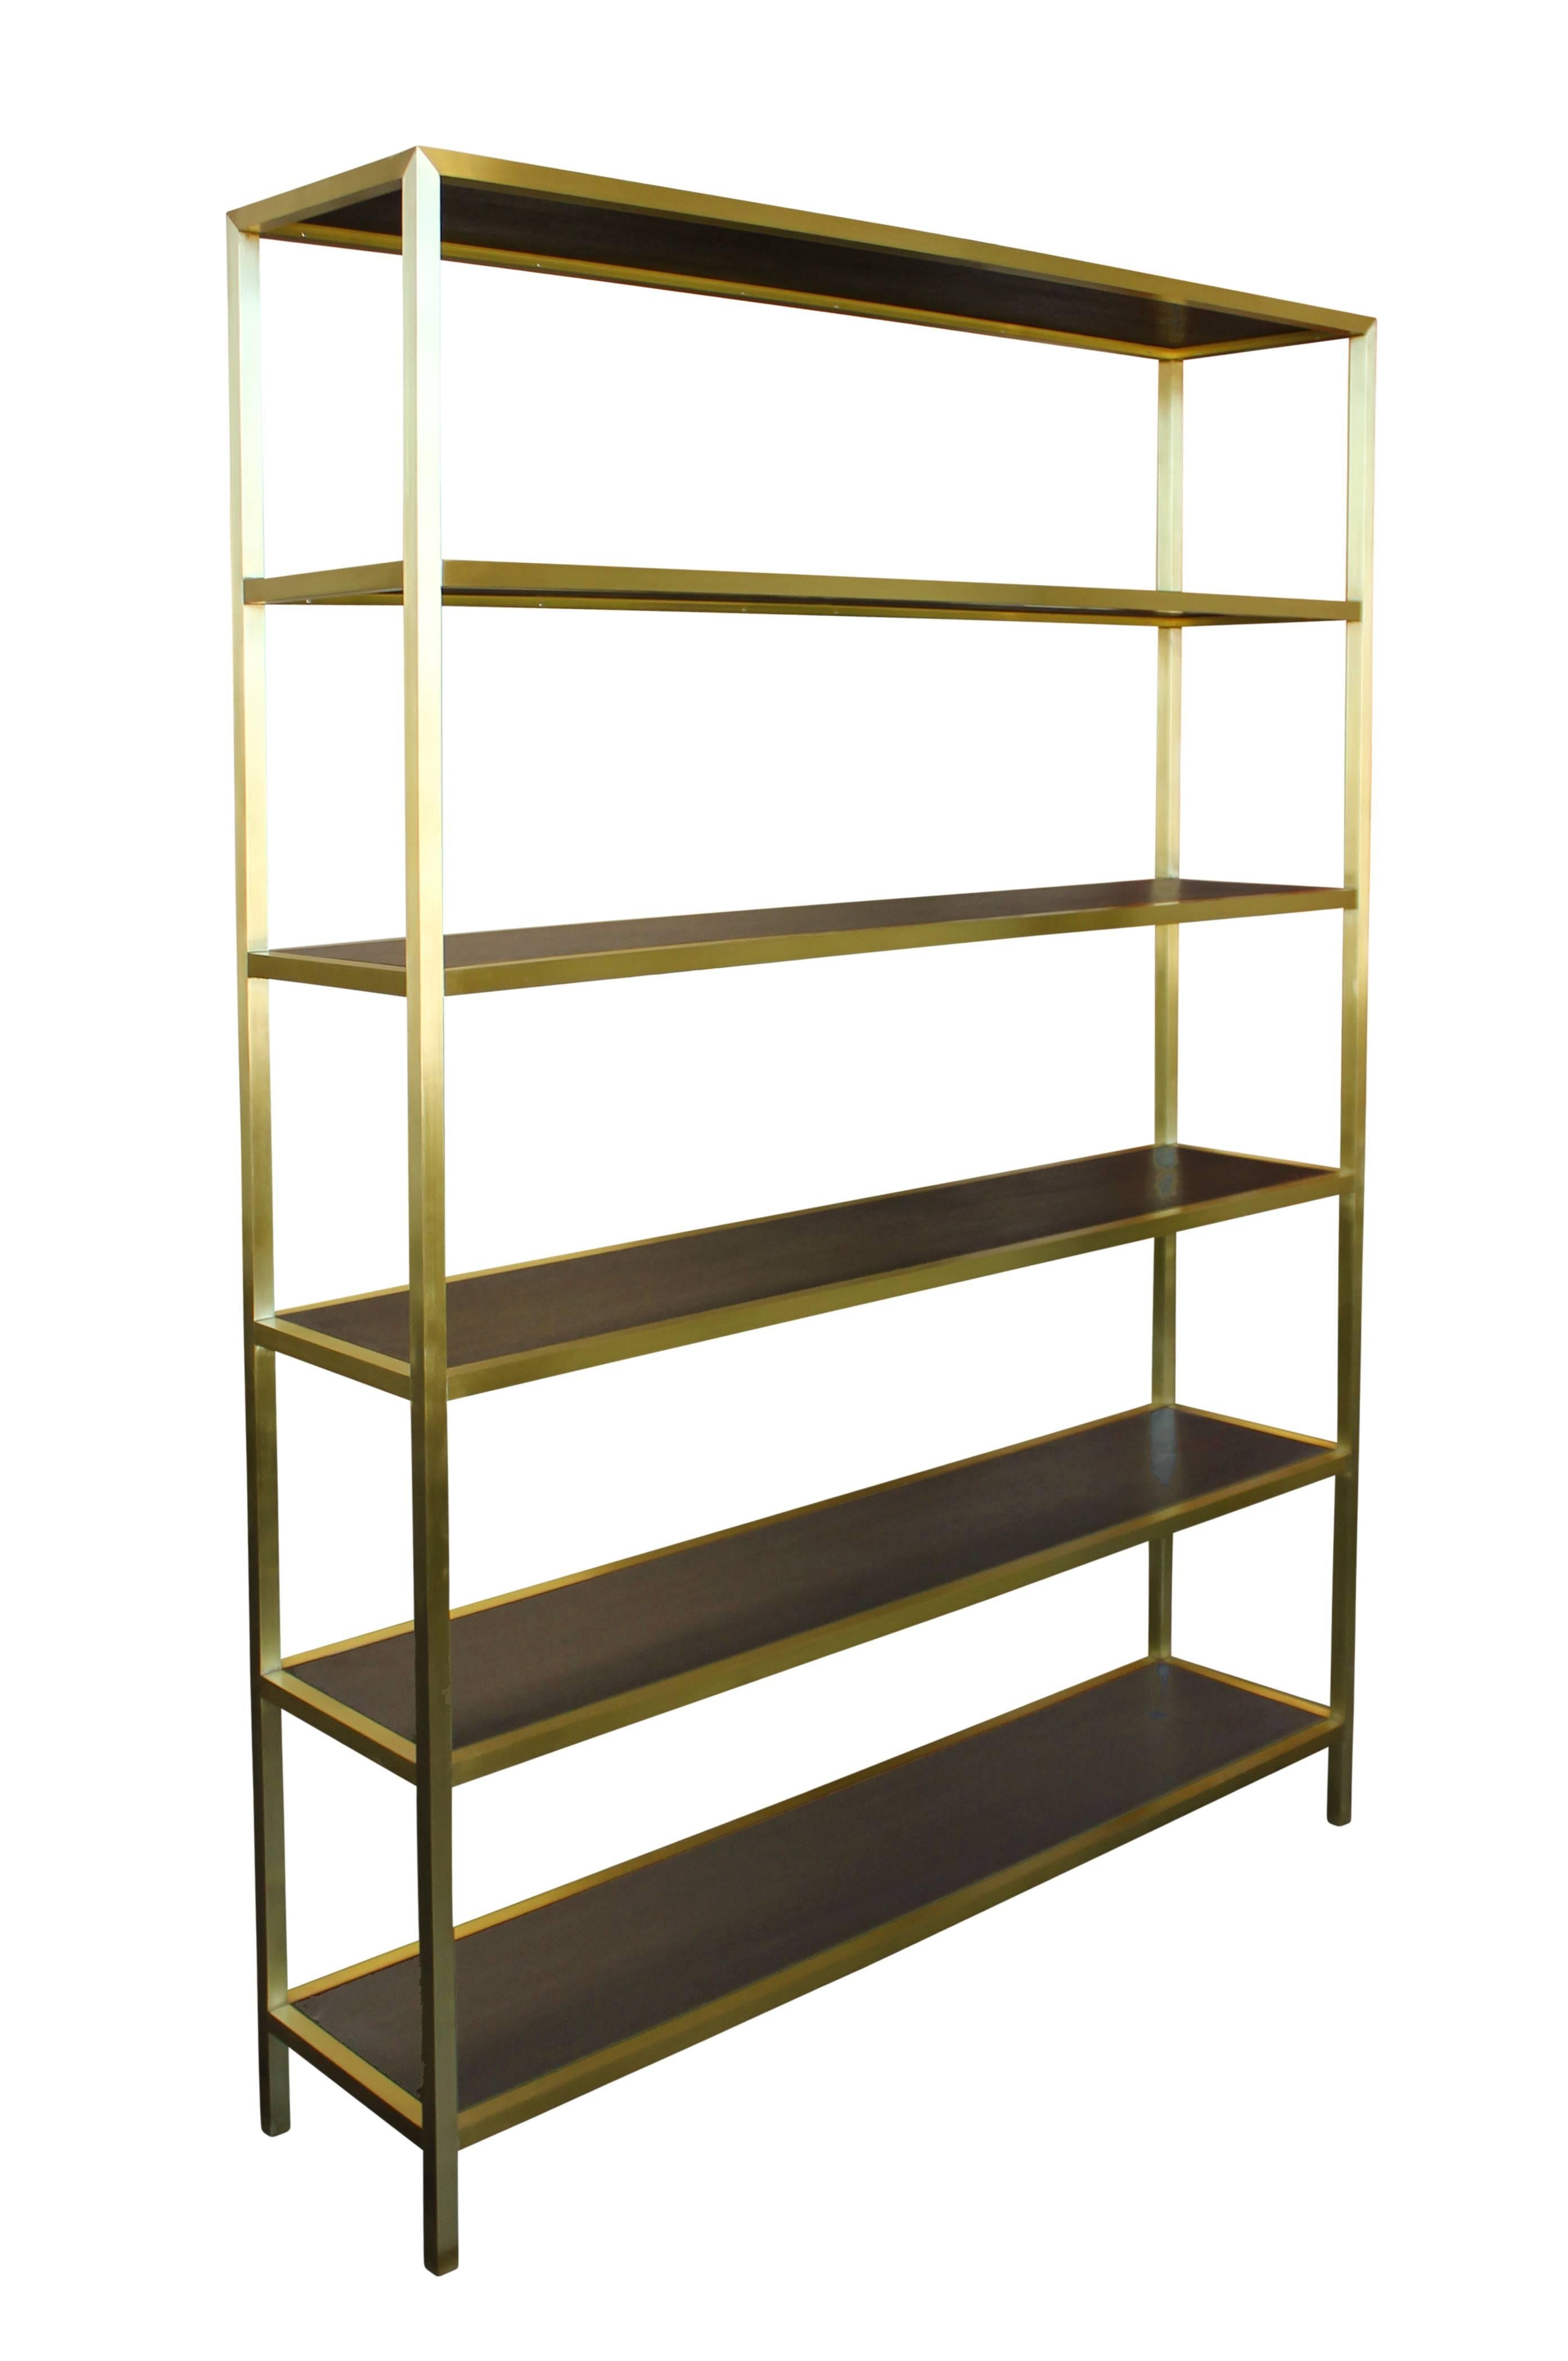 Brass frame etagere in satin finish with inset stained walnut shelves. With its dramatic proportions and luxe material palette this is a piece that defines a room. Available in custom sizes, finishes, and materials.